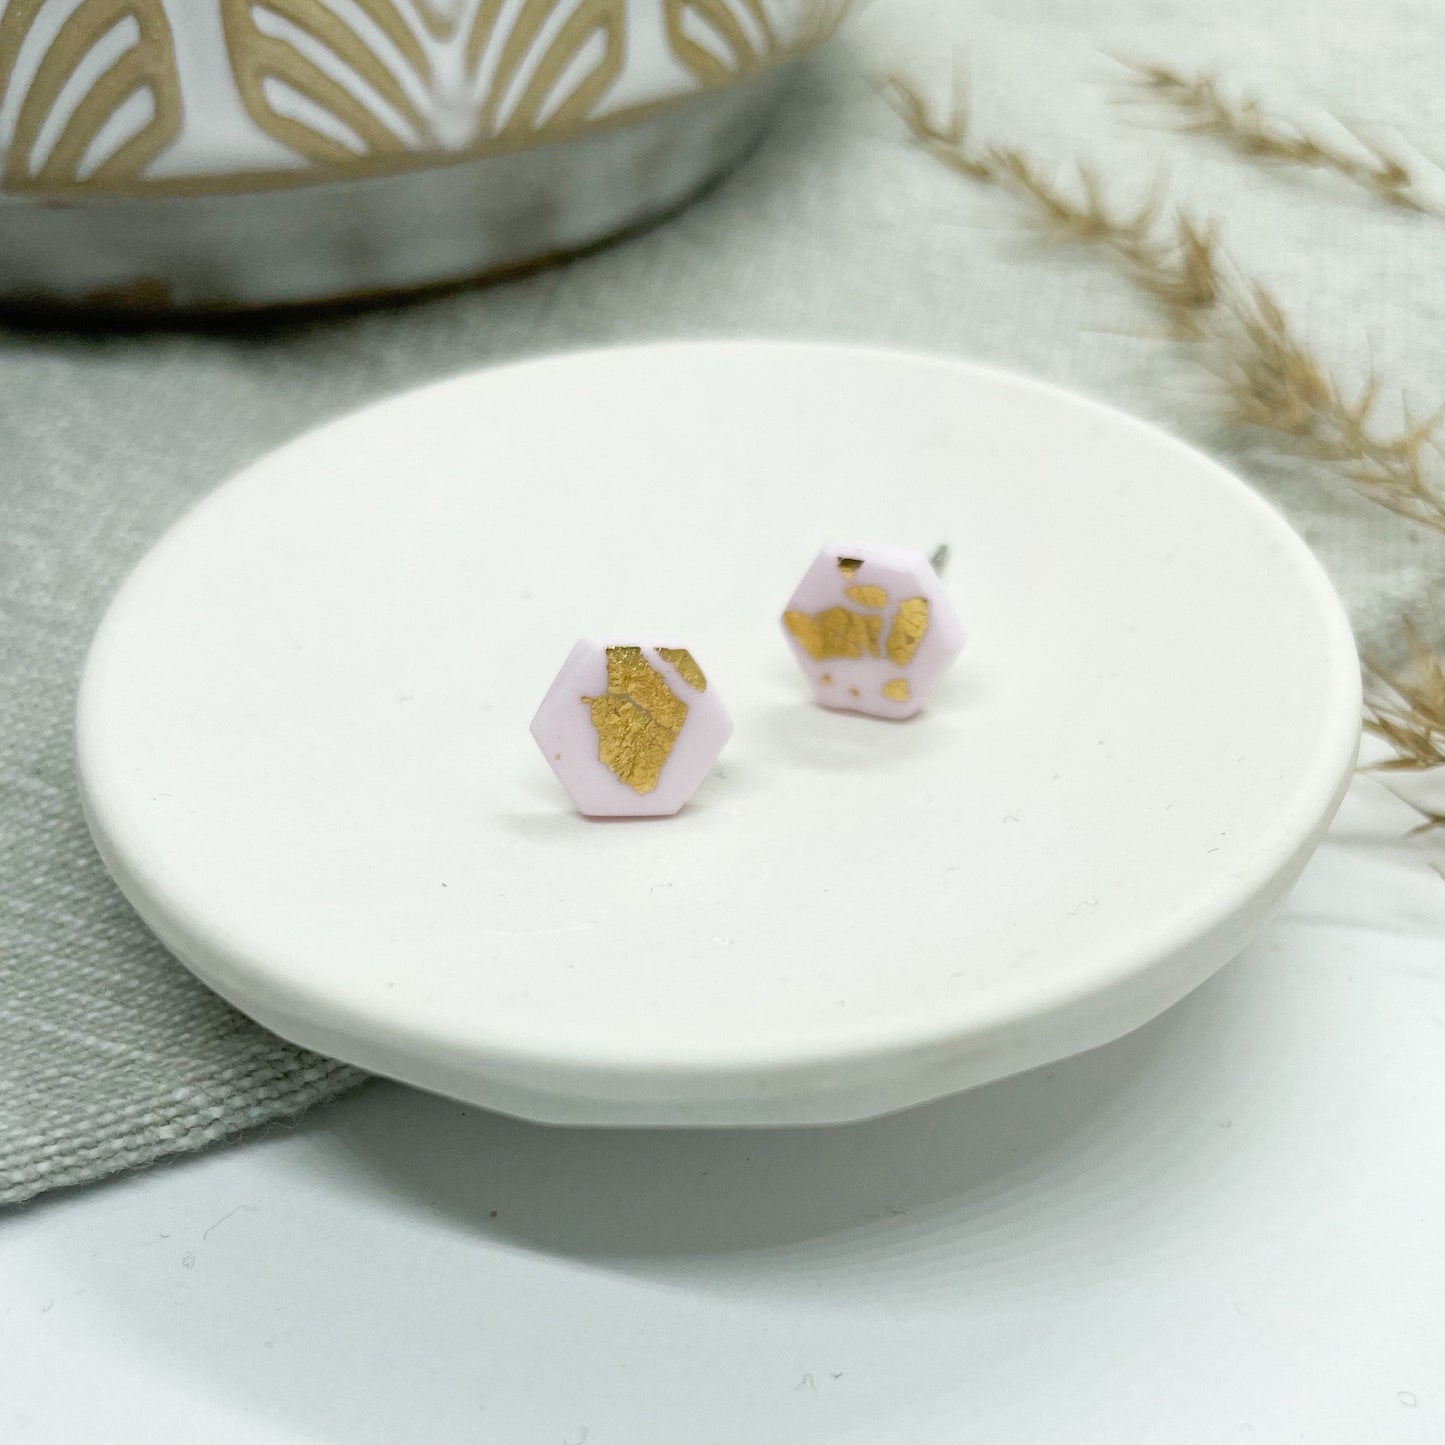 Pink and gold leaf, hexagon polymer clay stud earrings, post box gift, best friend birthday gift, girlfriend gift, mum gift.